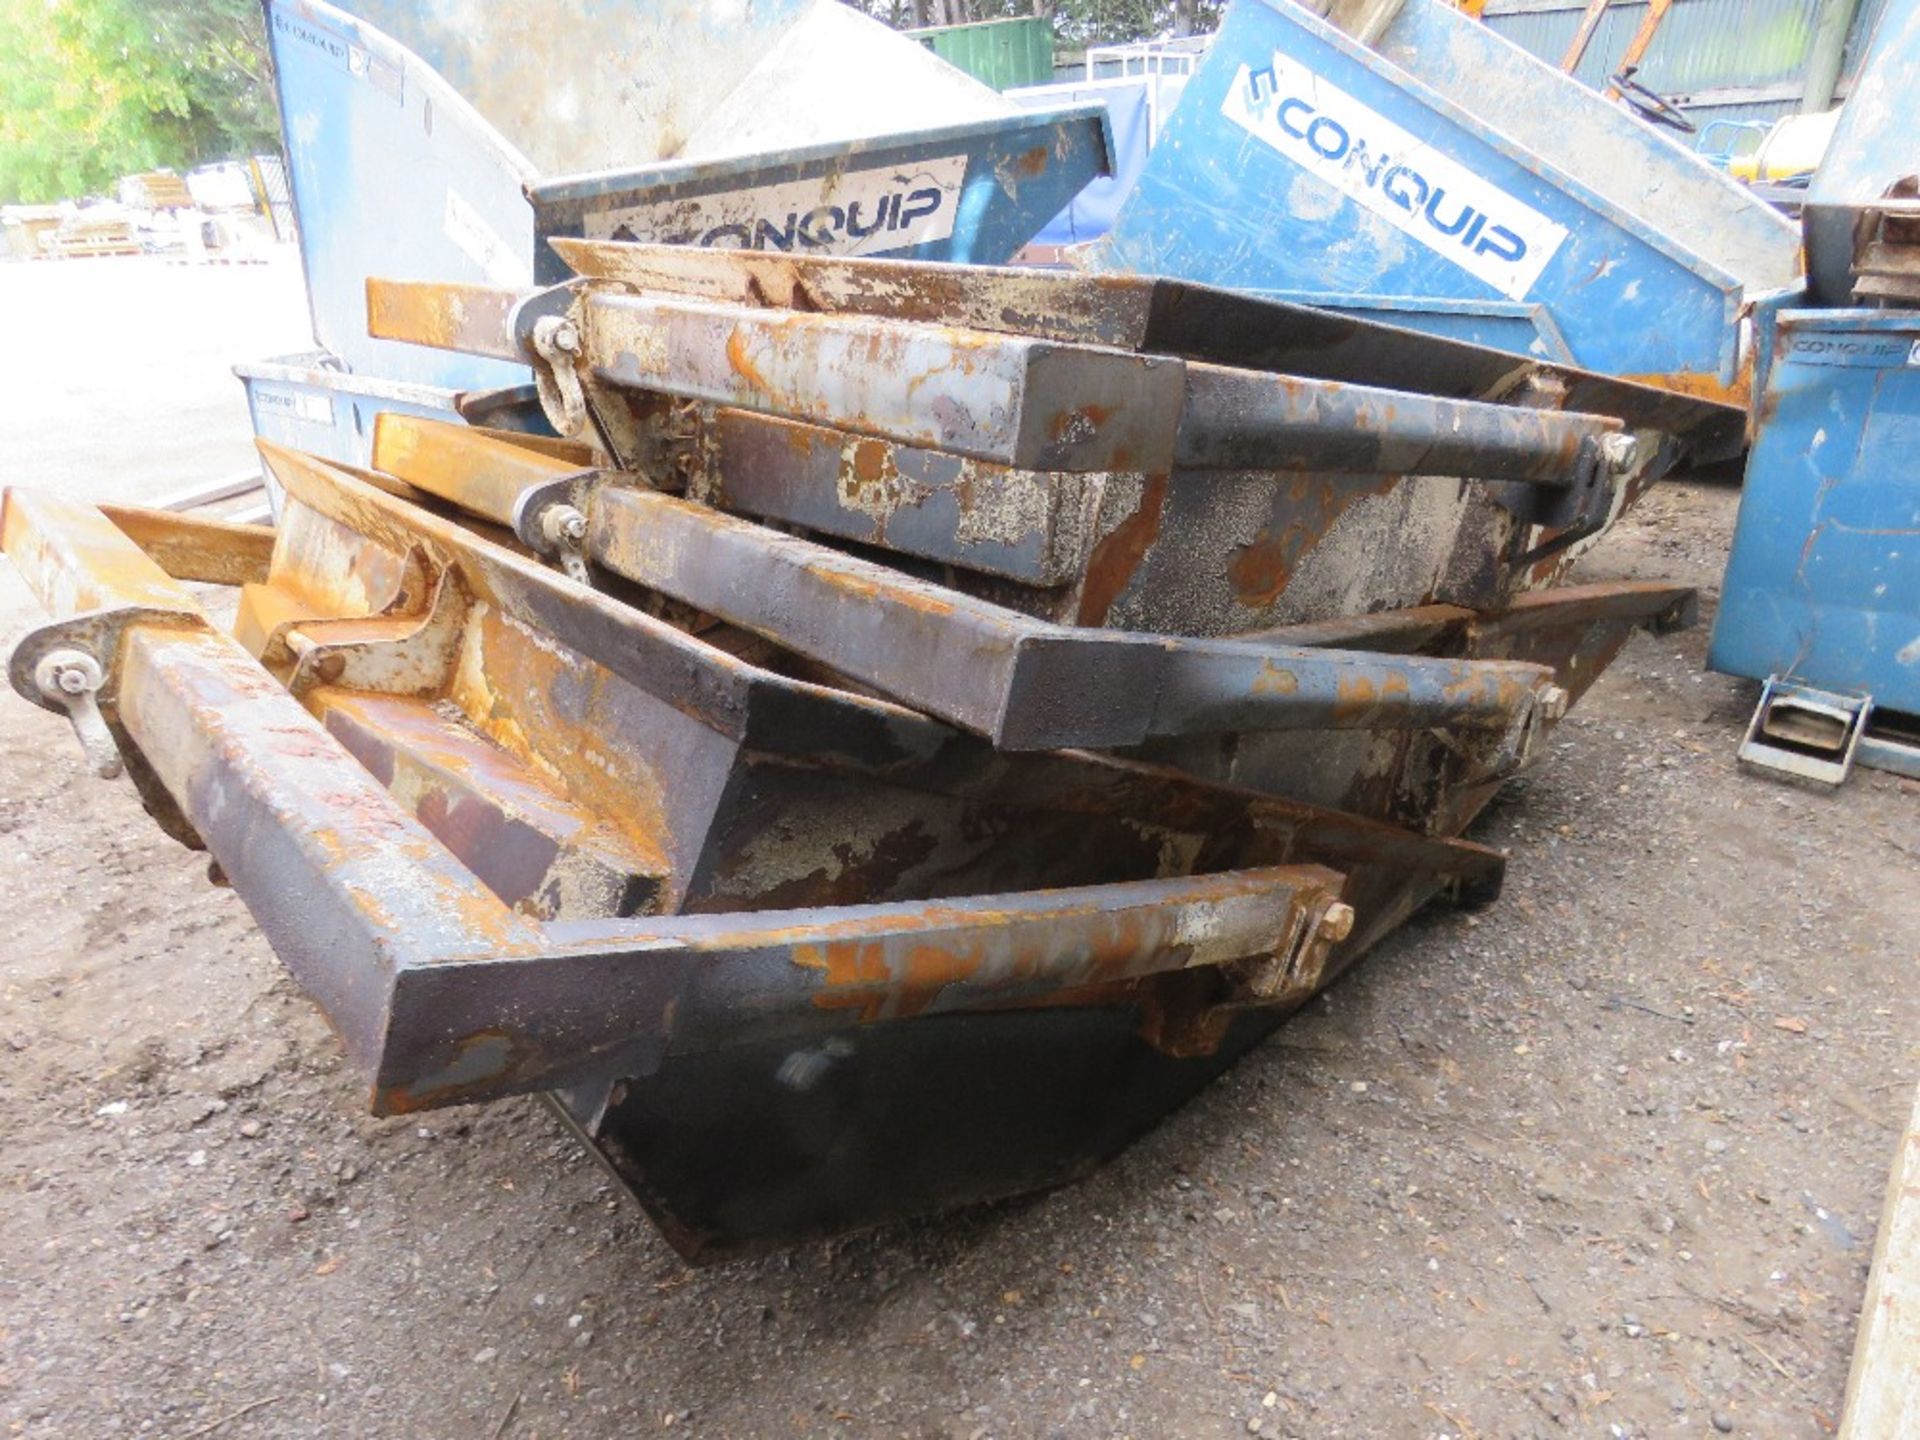 3 X CONQUIP BOAT SKIPS, FIRE DAMAGE TO PAINT. - Image 2 of 4